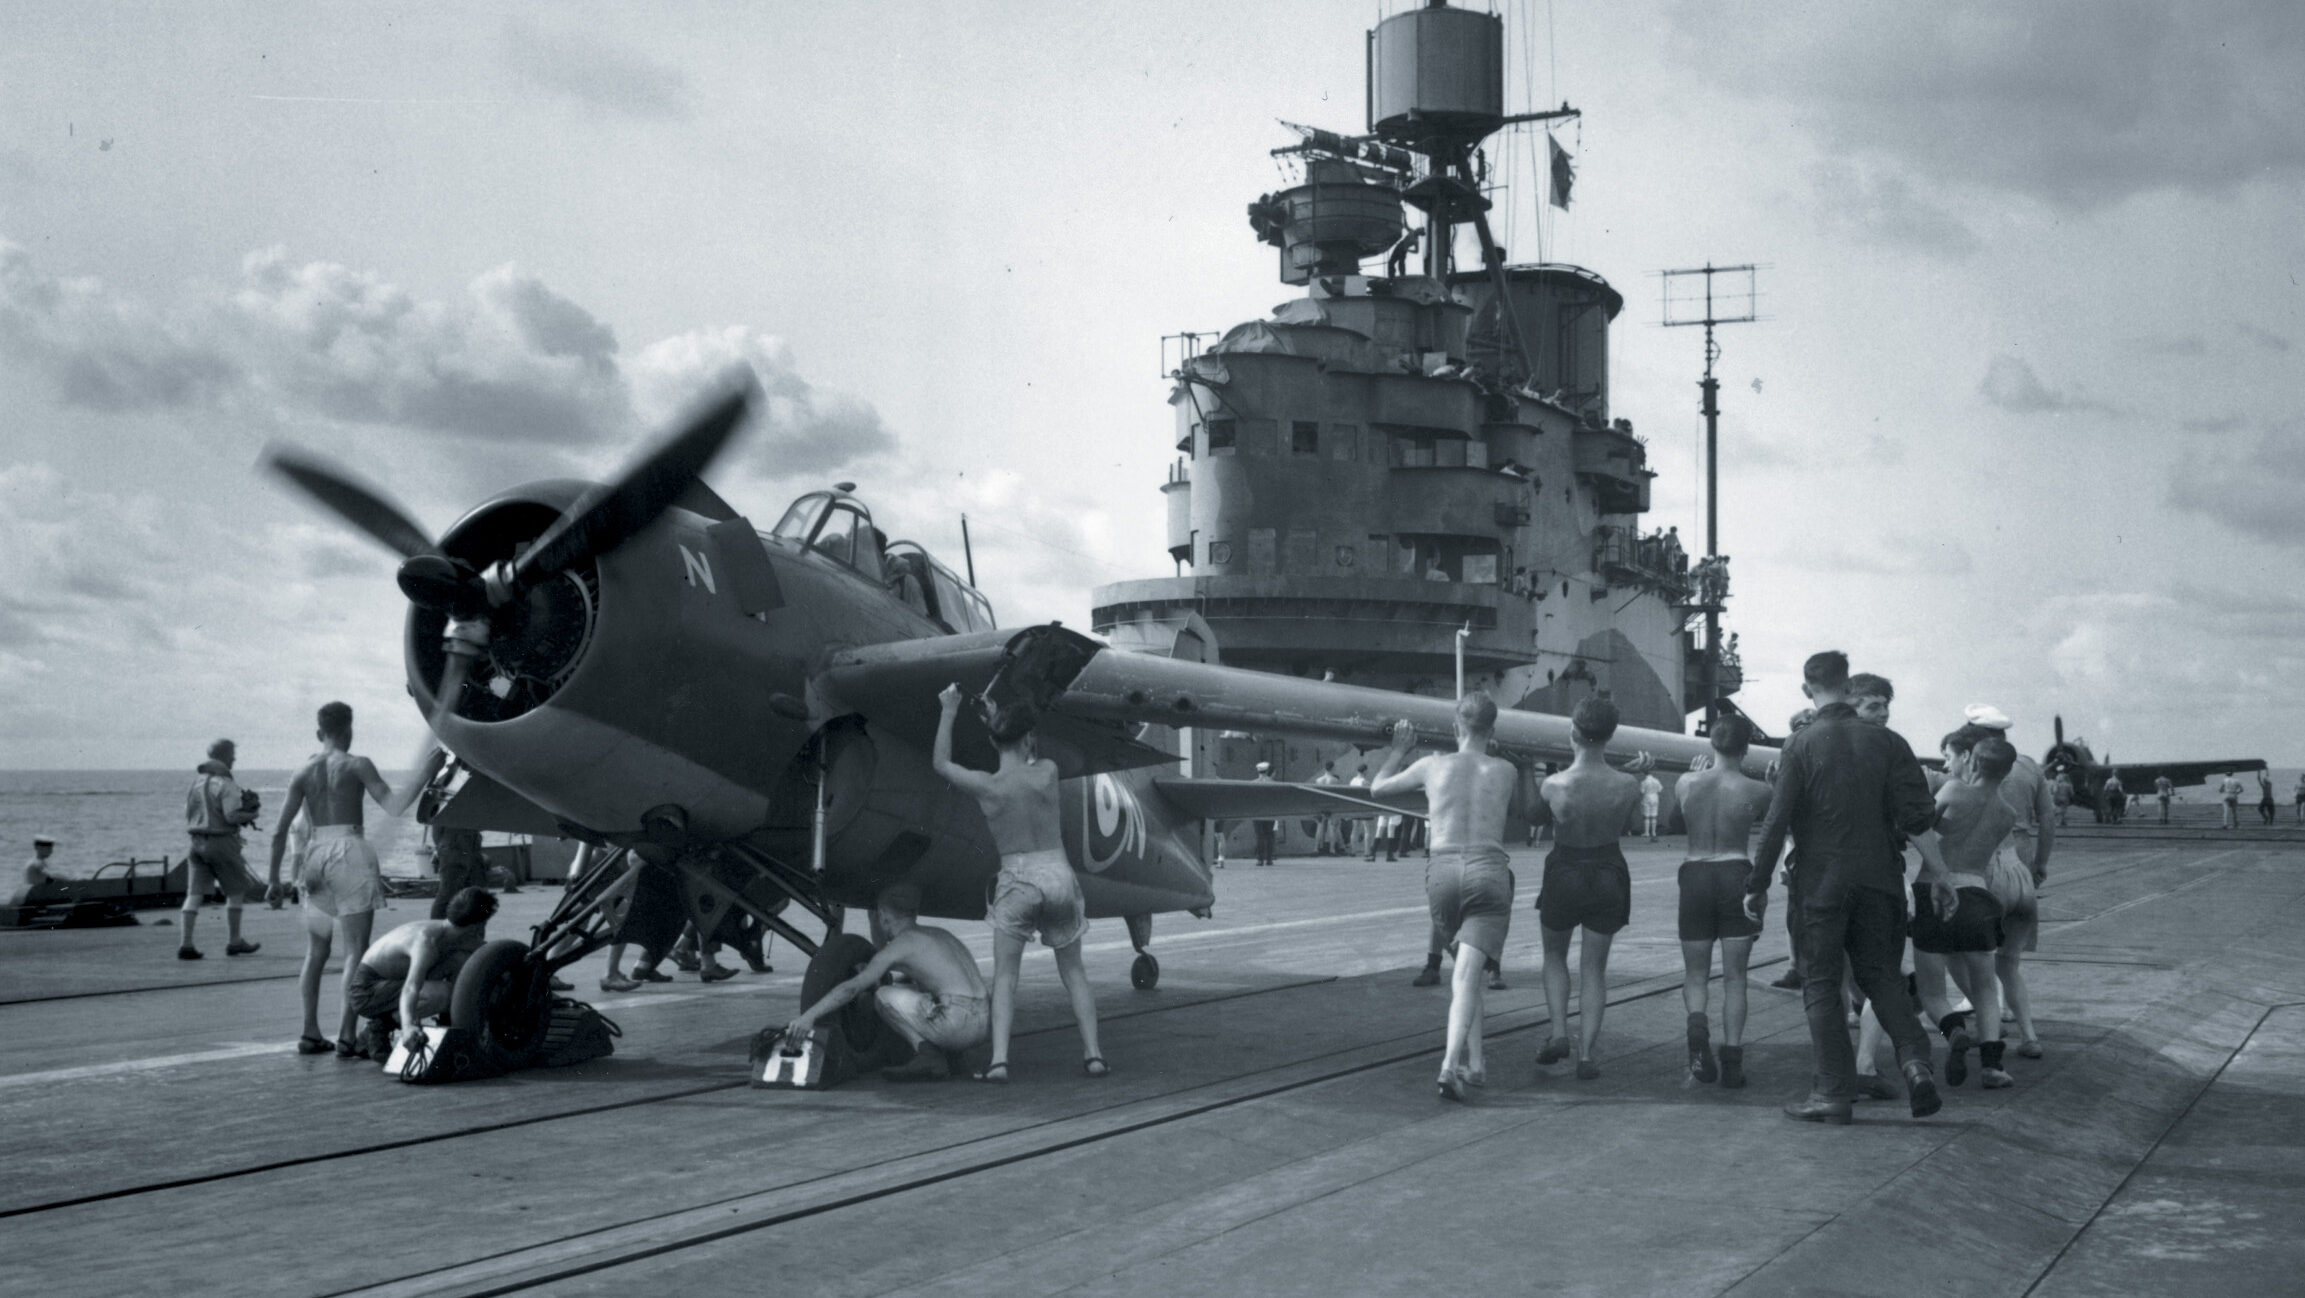 On the armored flight deck of the HMS Formidable crewmen fold the wings of a fighter plane that has just landed.